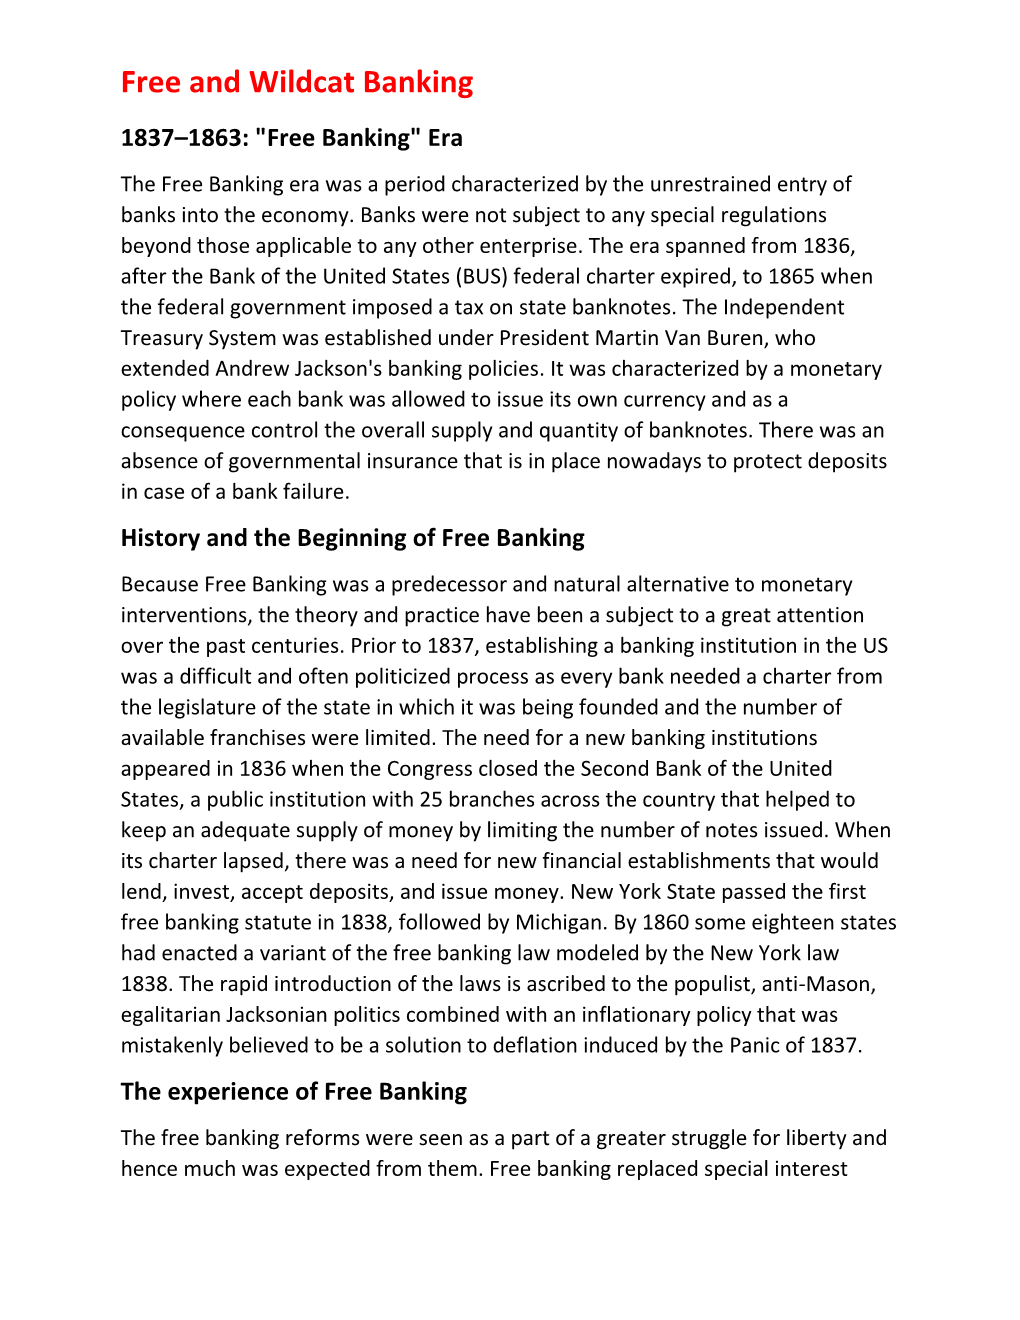 Free and Wildcat Banking 1837–1863: "Free Banking" Era the Free Banking Era Was a Period Characterized by the Unrestrained Entry of Banks Into the Economy